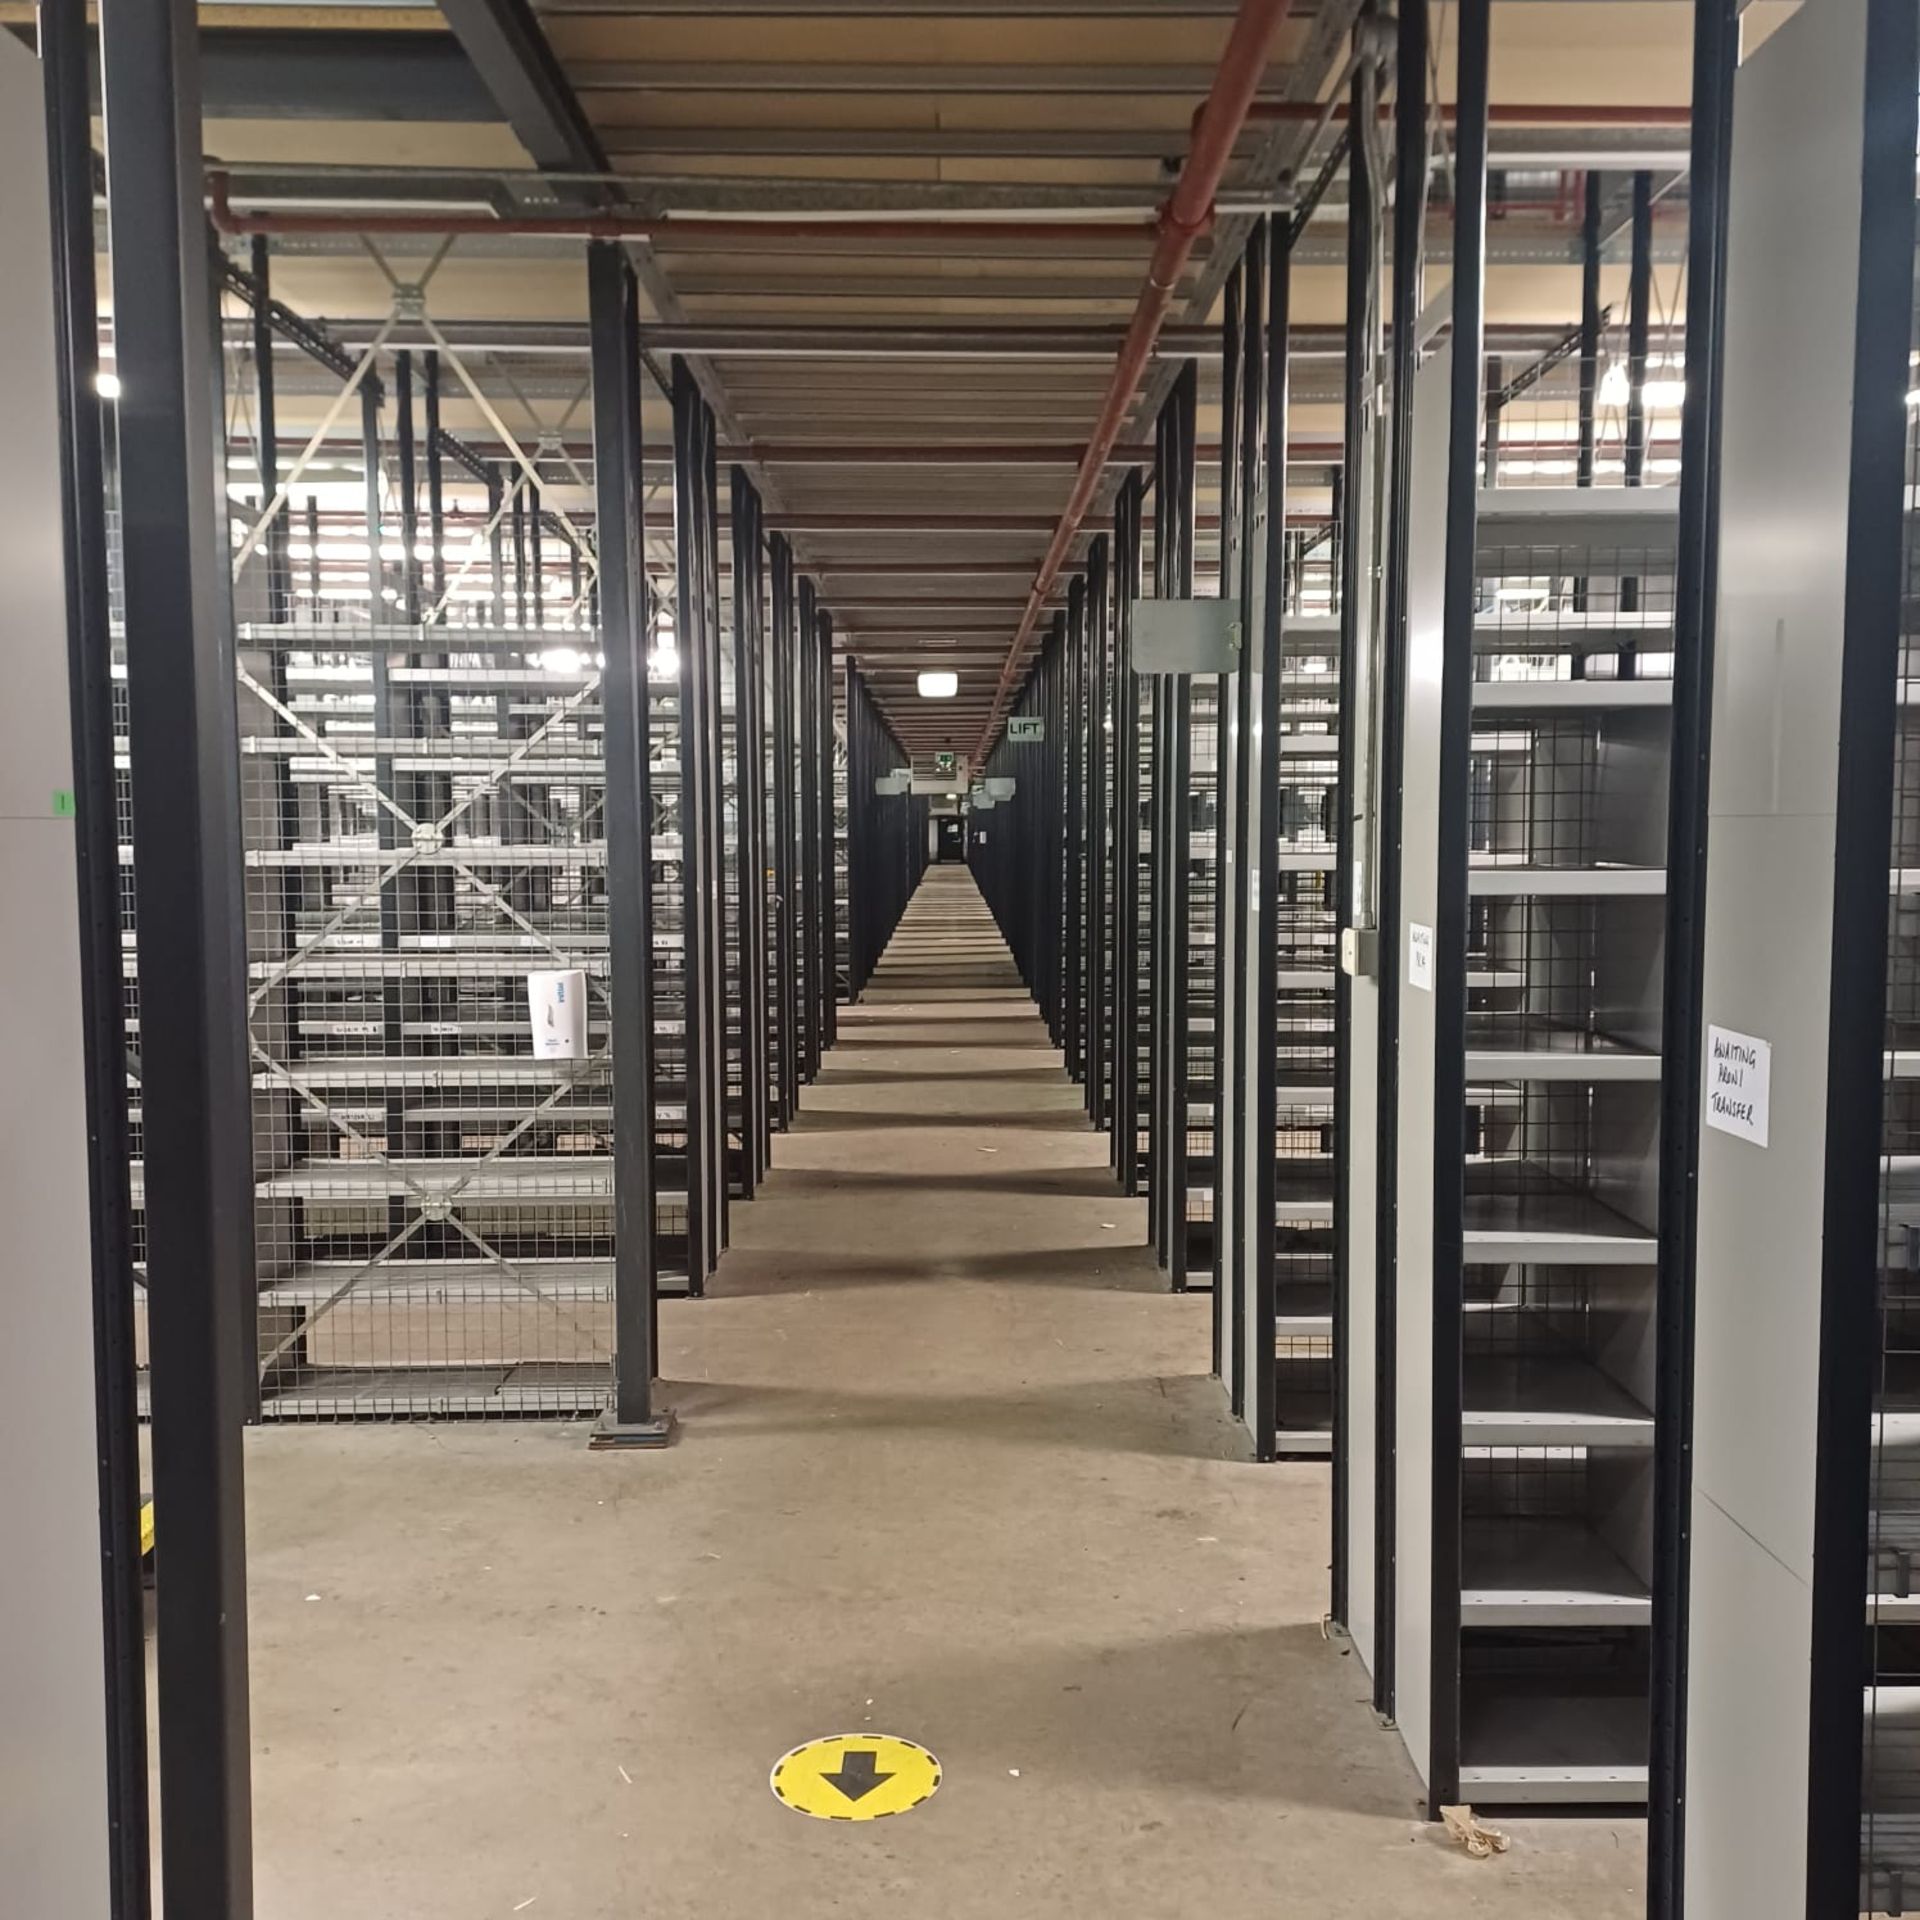 100 Bays - 3.5m height - Link 51 Shelving - 400mm depth x 1m length - Image 2 of 2